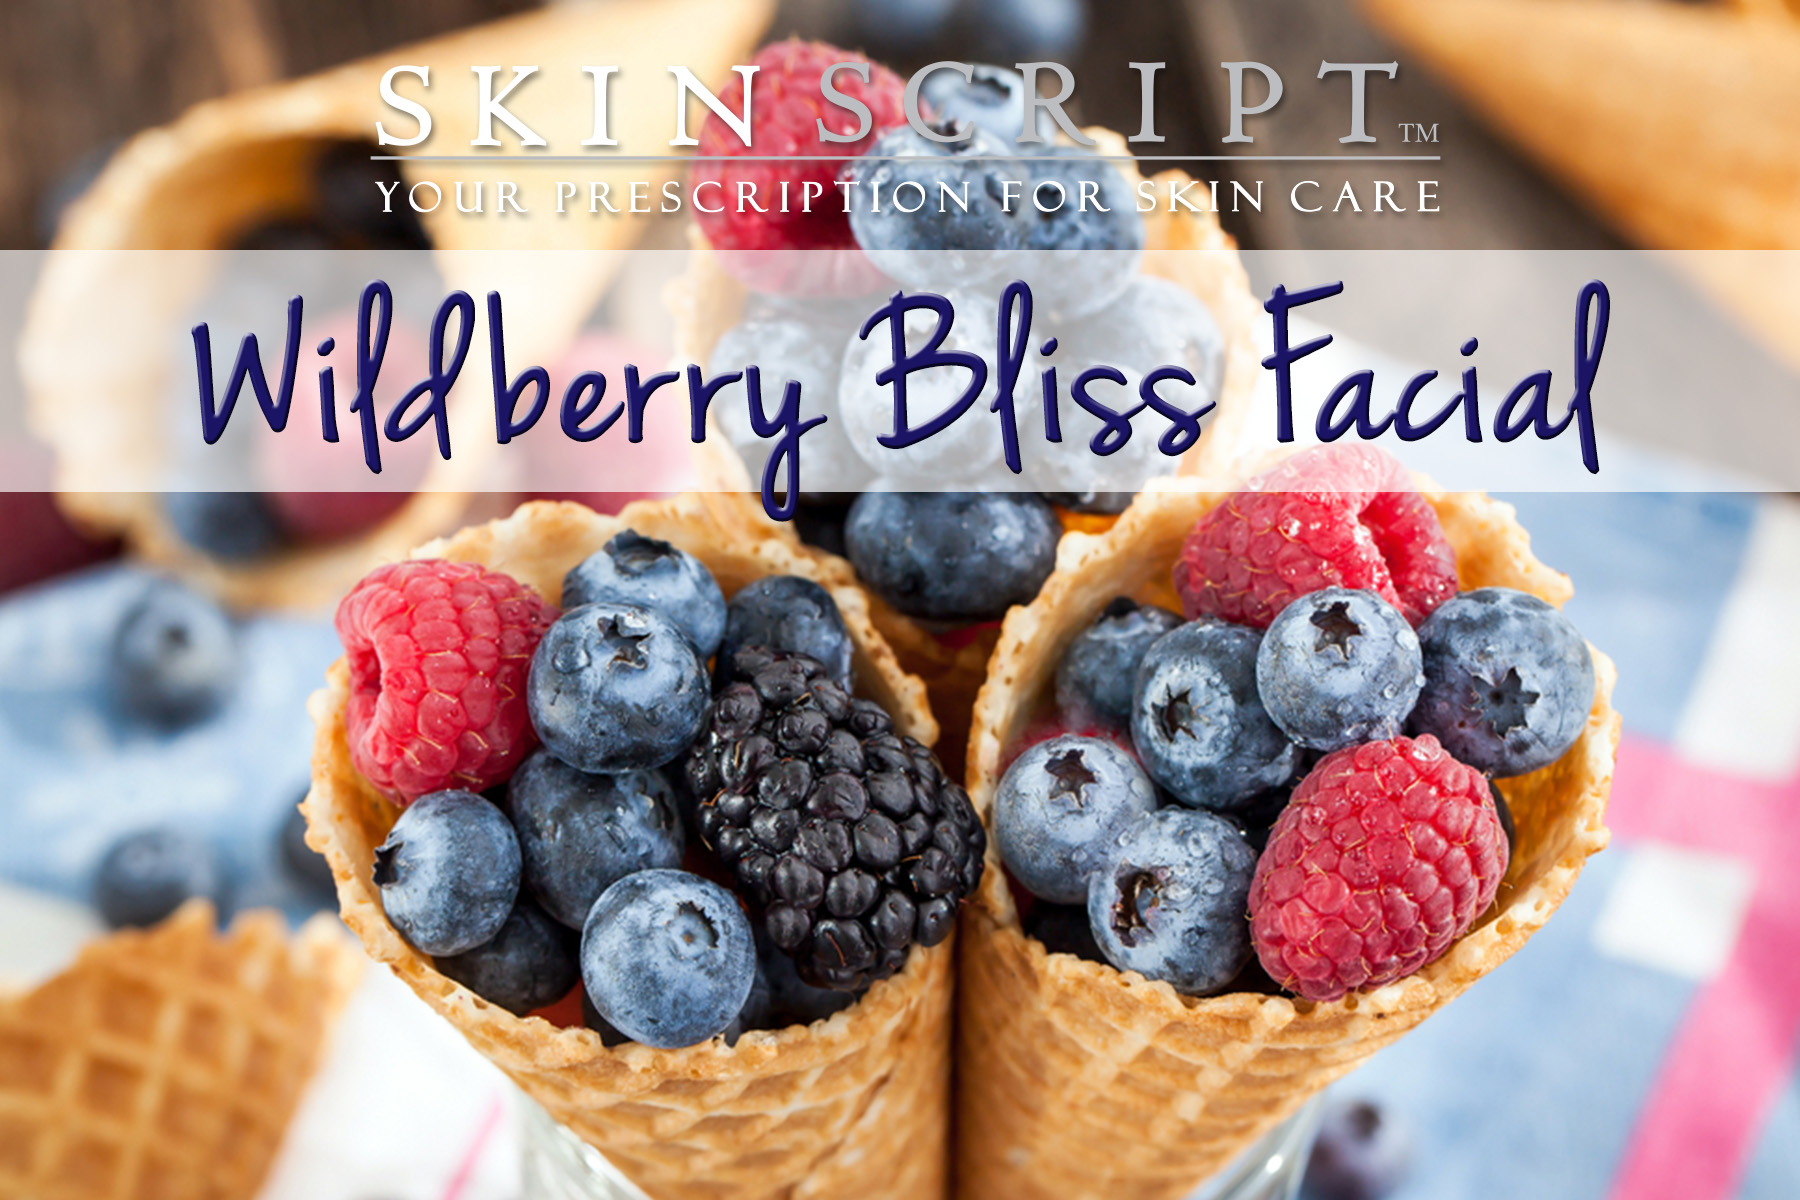 Wildberry Bliss Facial 